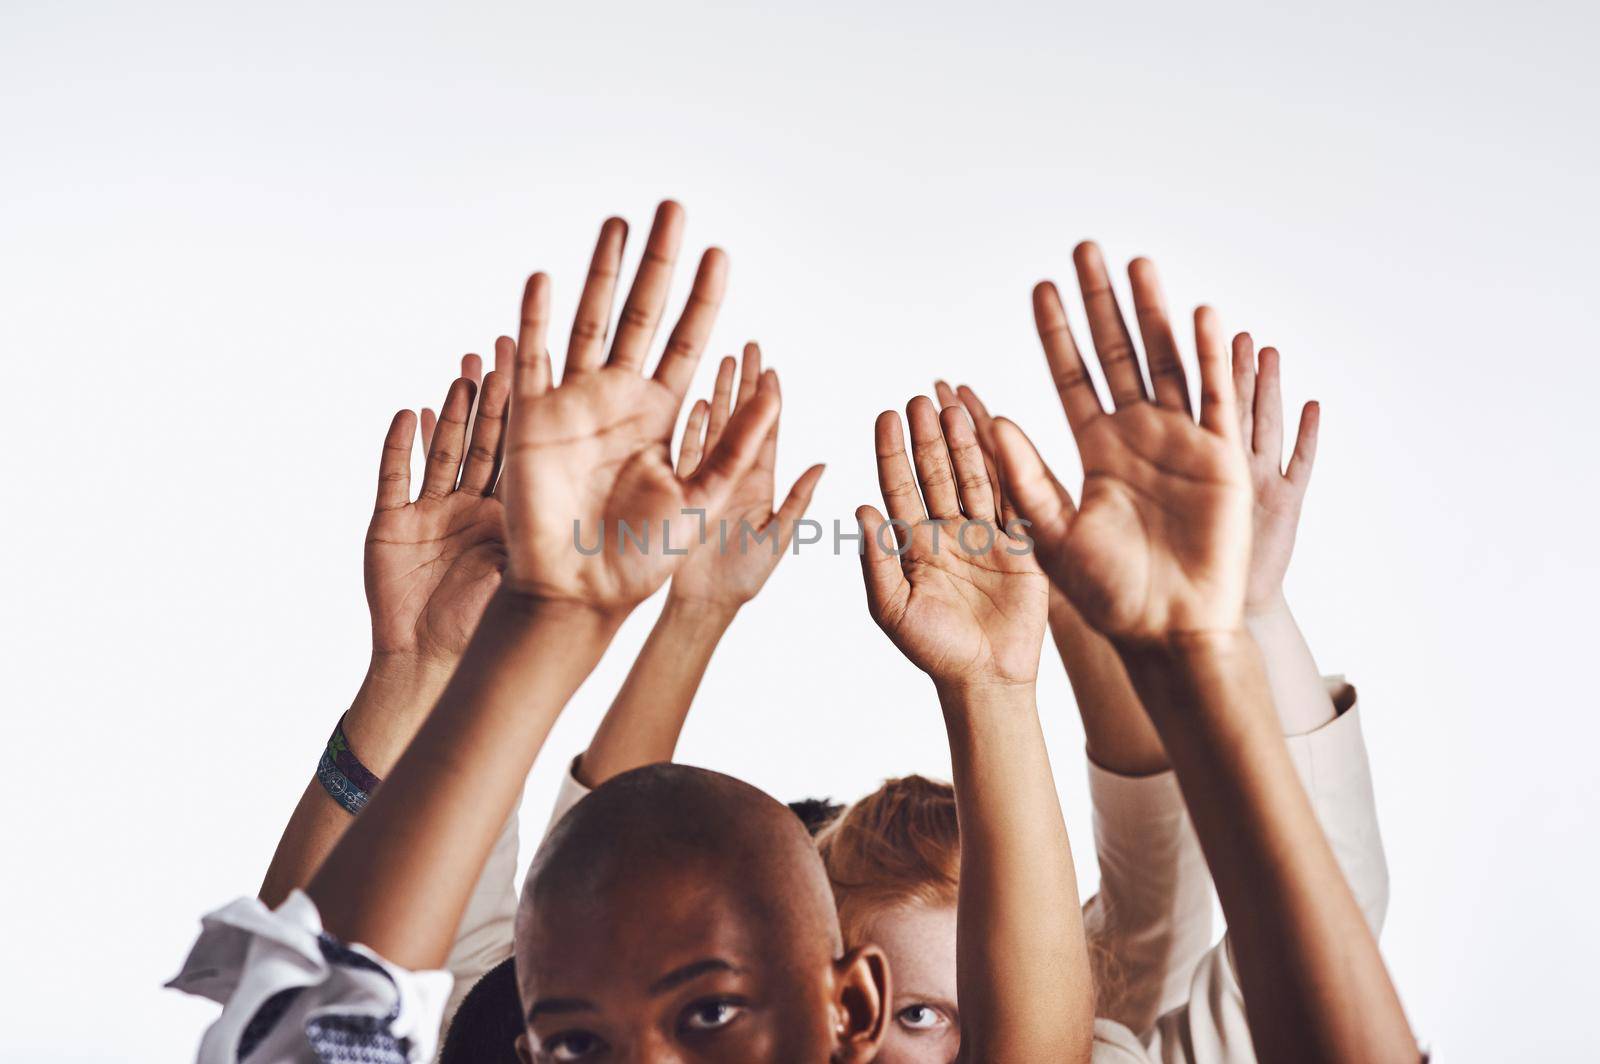 Sometimes you just have to accept your failure. a group of hands reaching up against a white background. by YuriArcurs